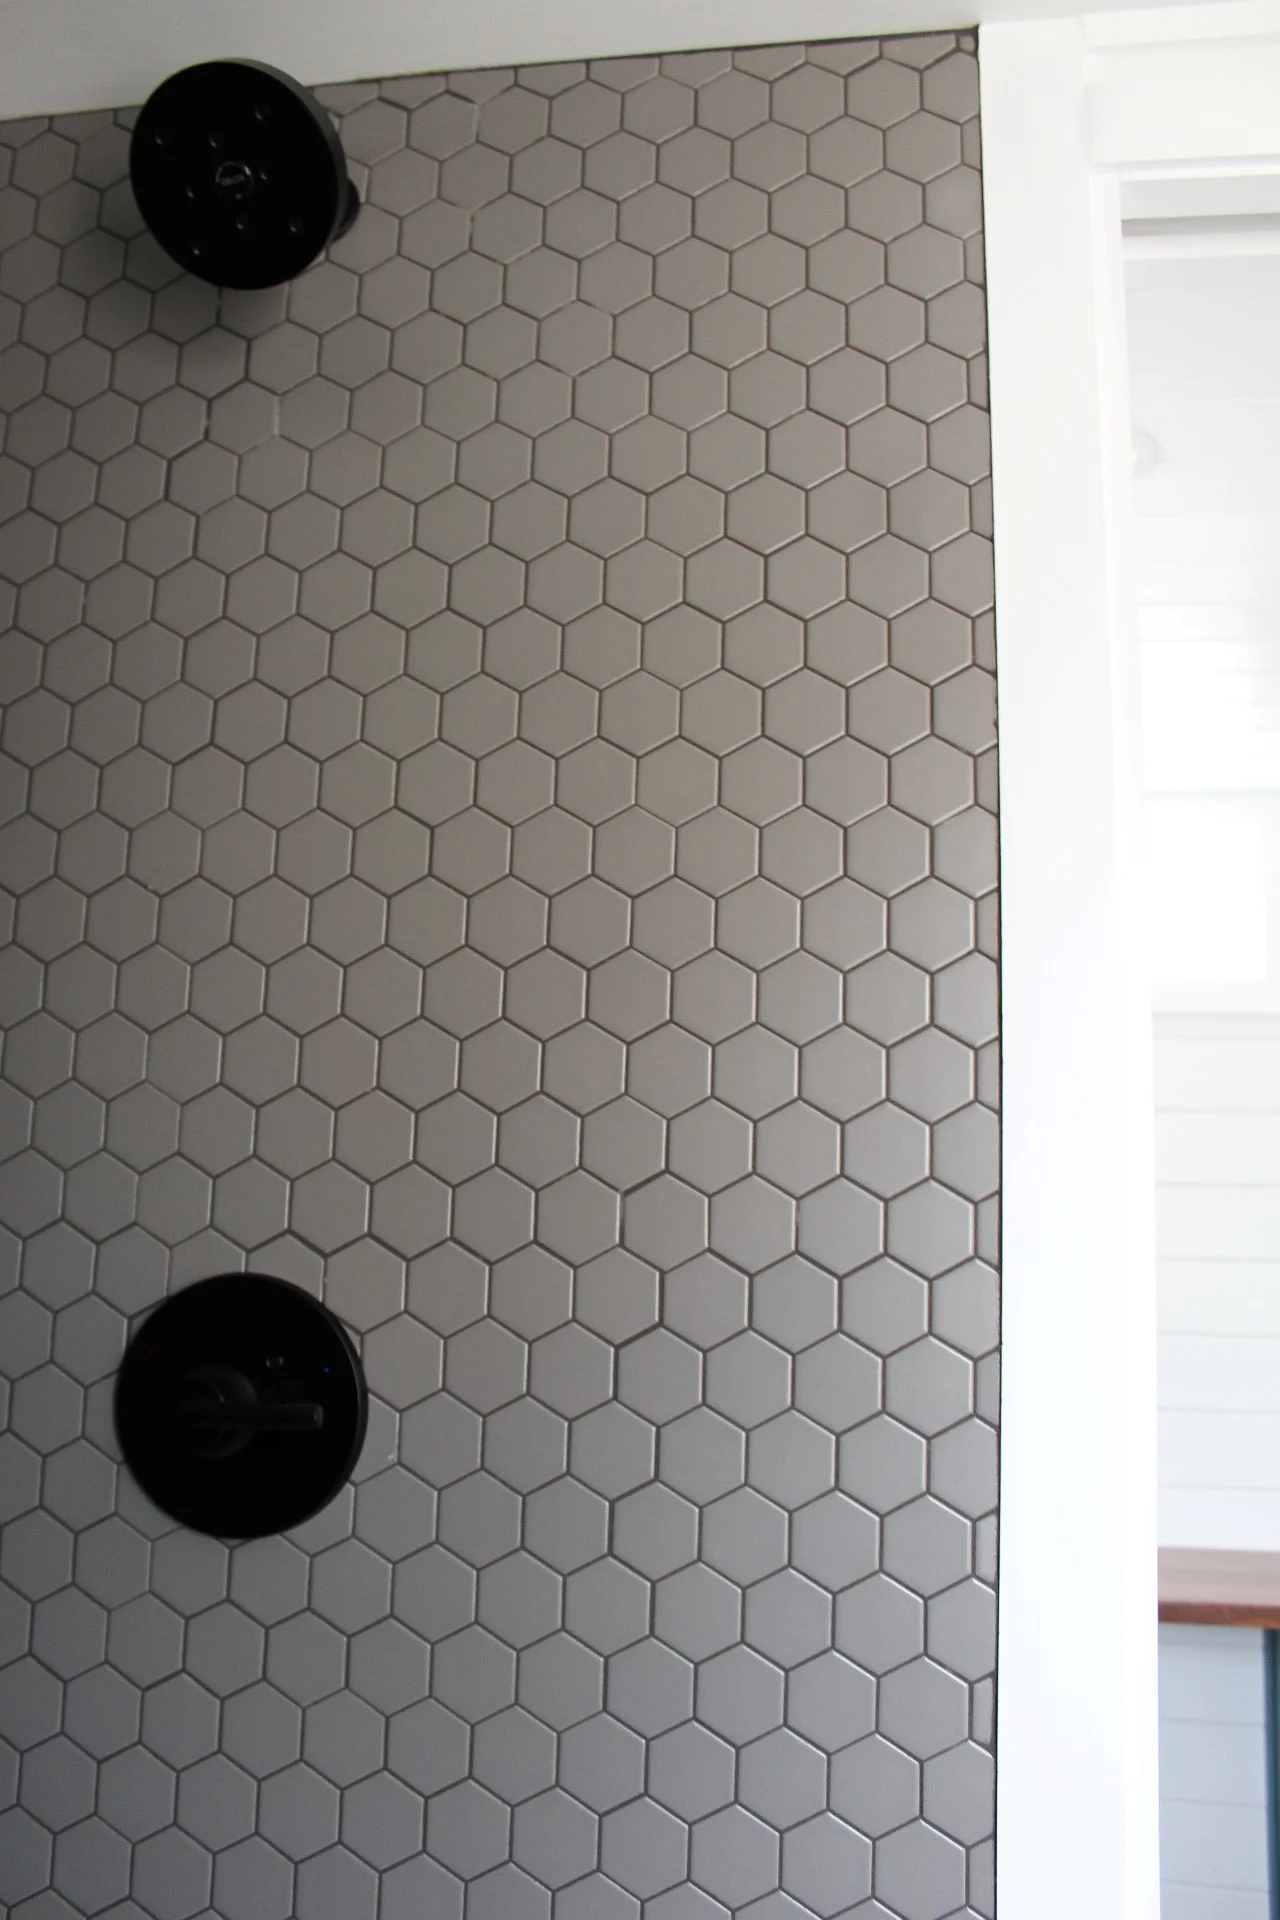 Tile Shower - Harvest by Mustard Seed Tiny Homes